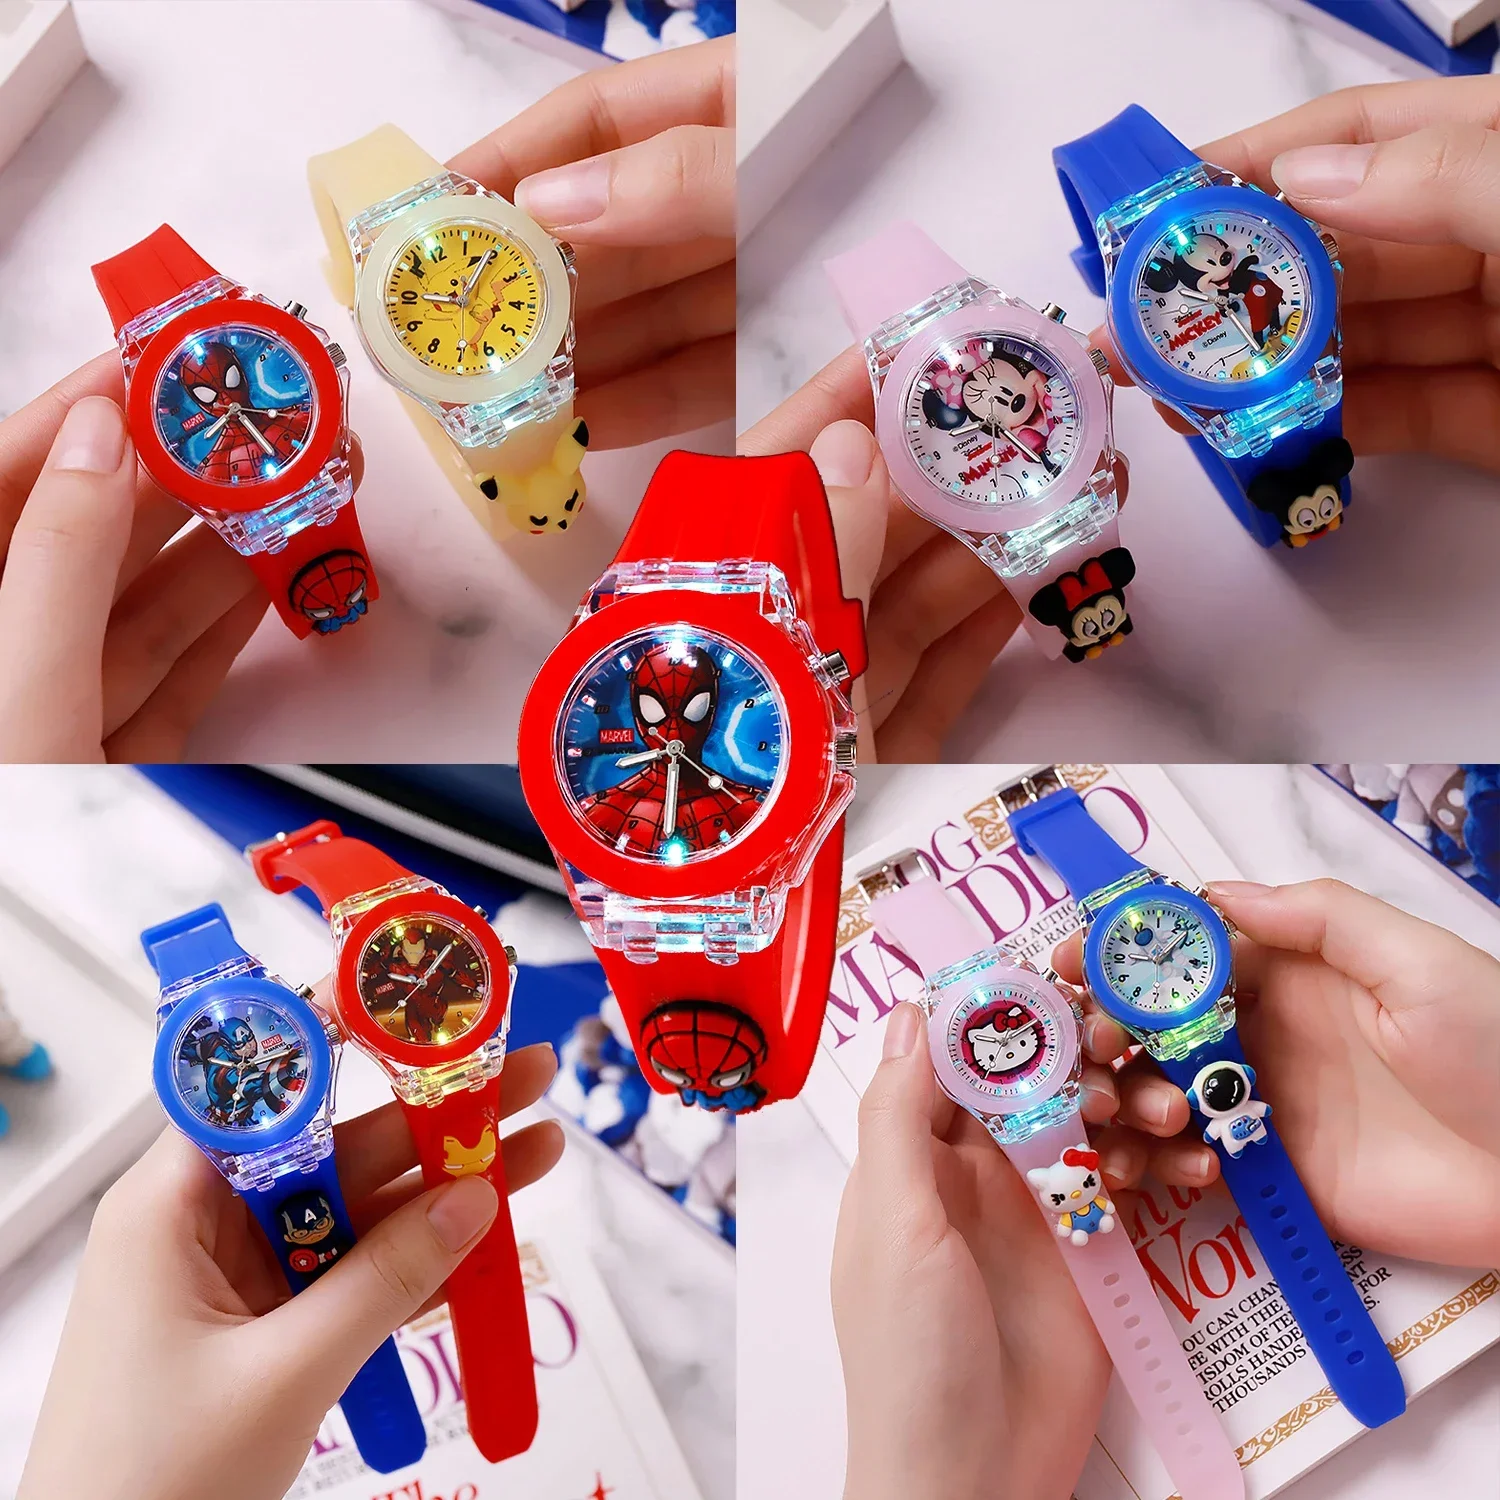 

Disney Frozen Princess Spider Man Pattern Led Glowing Flash Children Watch Toys Fashion Birthday Party Christmas Gifts for Kids